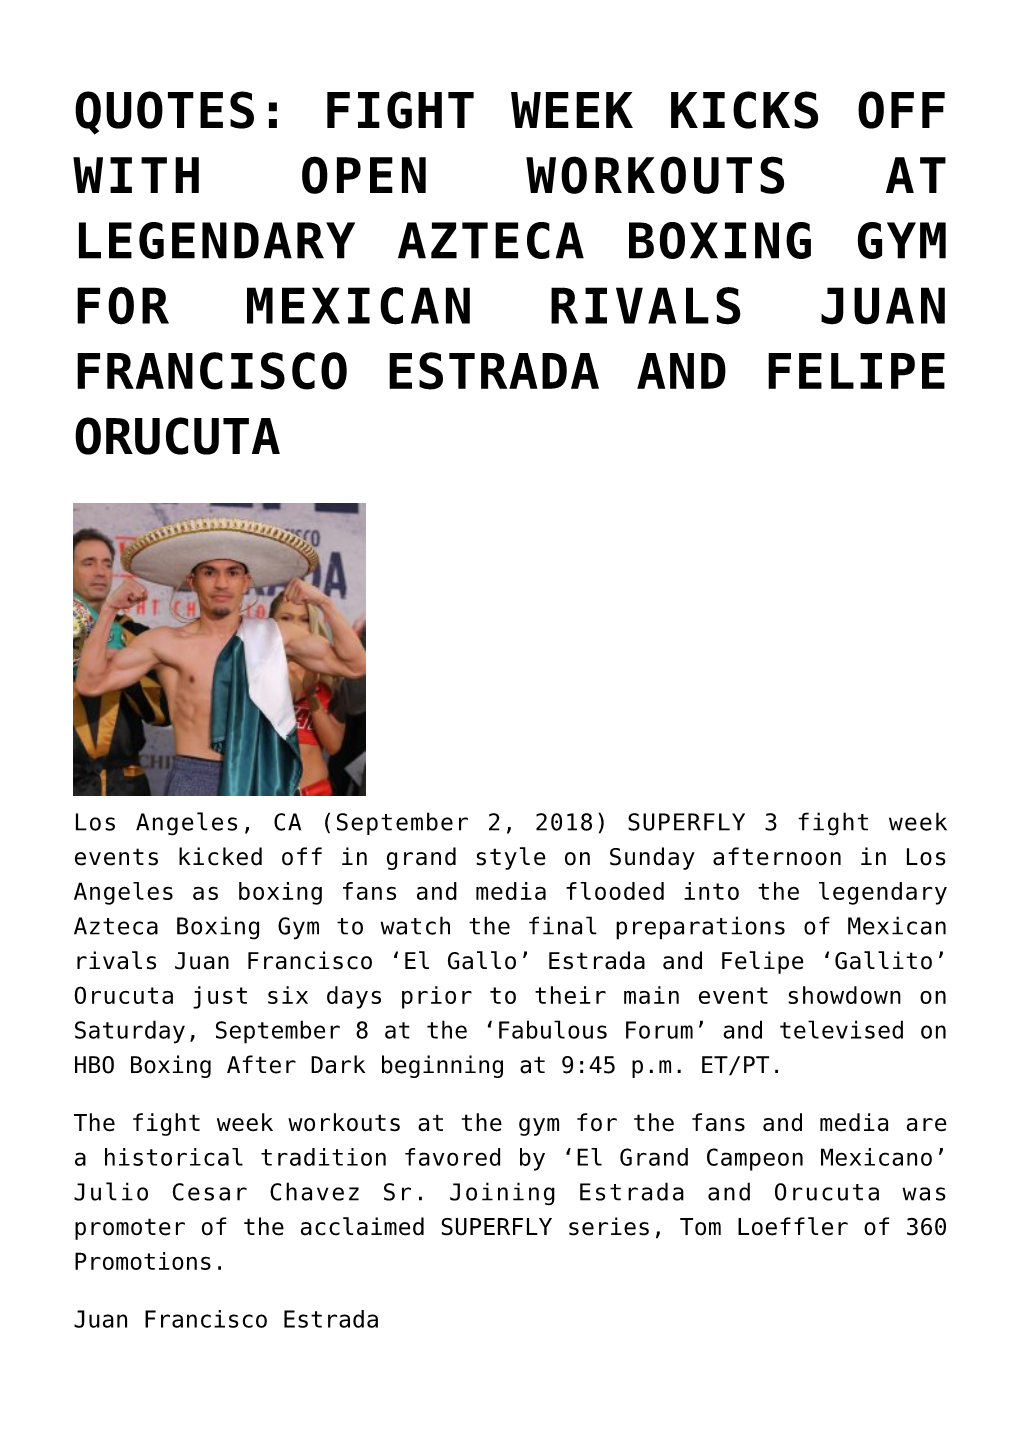 Quotes: Fight Week Kicks Off with Open Workouts at Legendary Azteca Boxing Gym for Mexican Rivals Juan Francisco Estrada and Felipe Orucuta